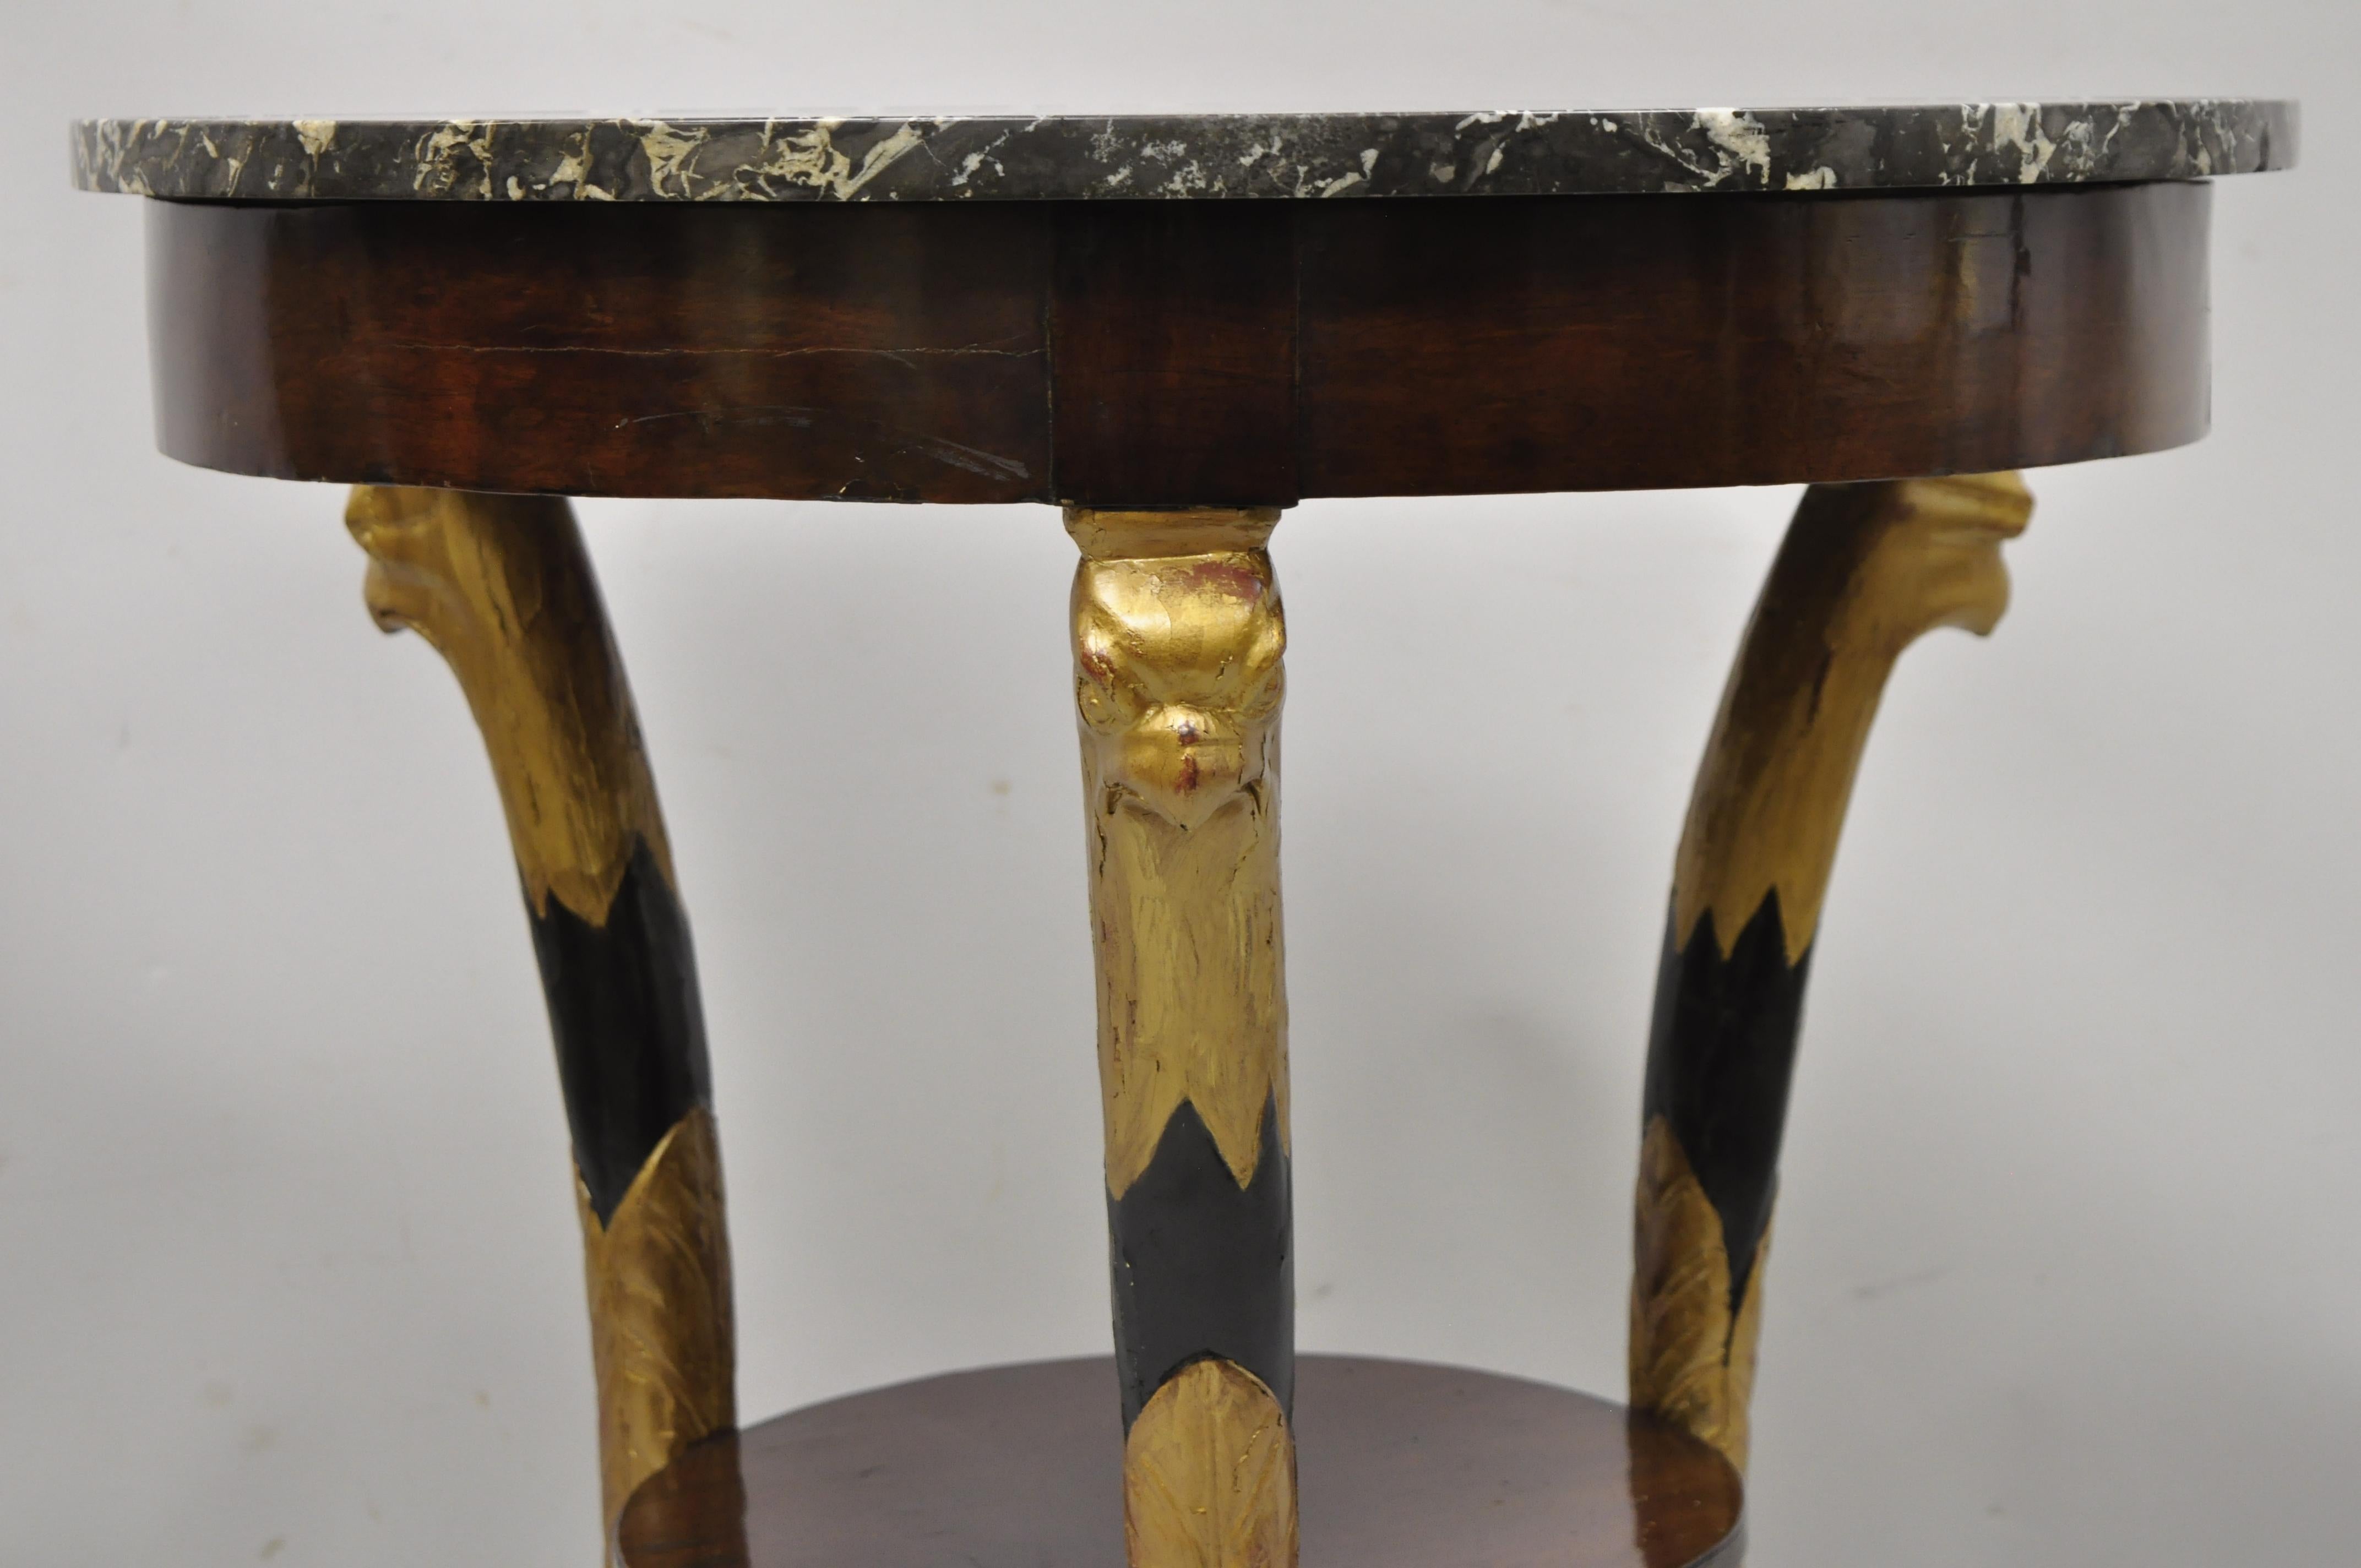 Antique French Empire Biedermeier round marble top gold gilt eagle carved gueridon center table. Item features round marble top with raised edge, gold gilt eagle heads, lower shelf, ebonized finish, paw feet, beautiful wood grain, very nice antique